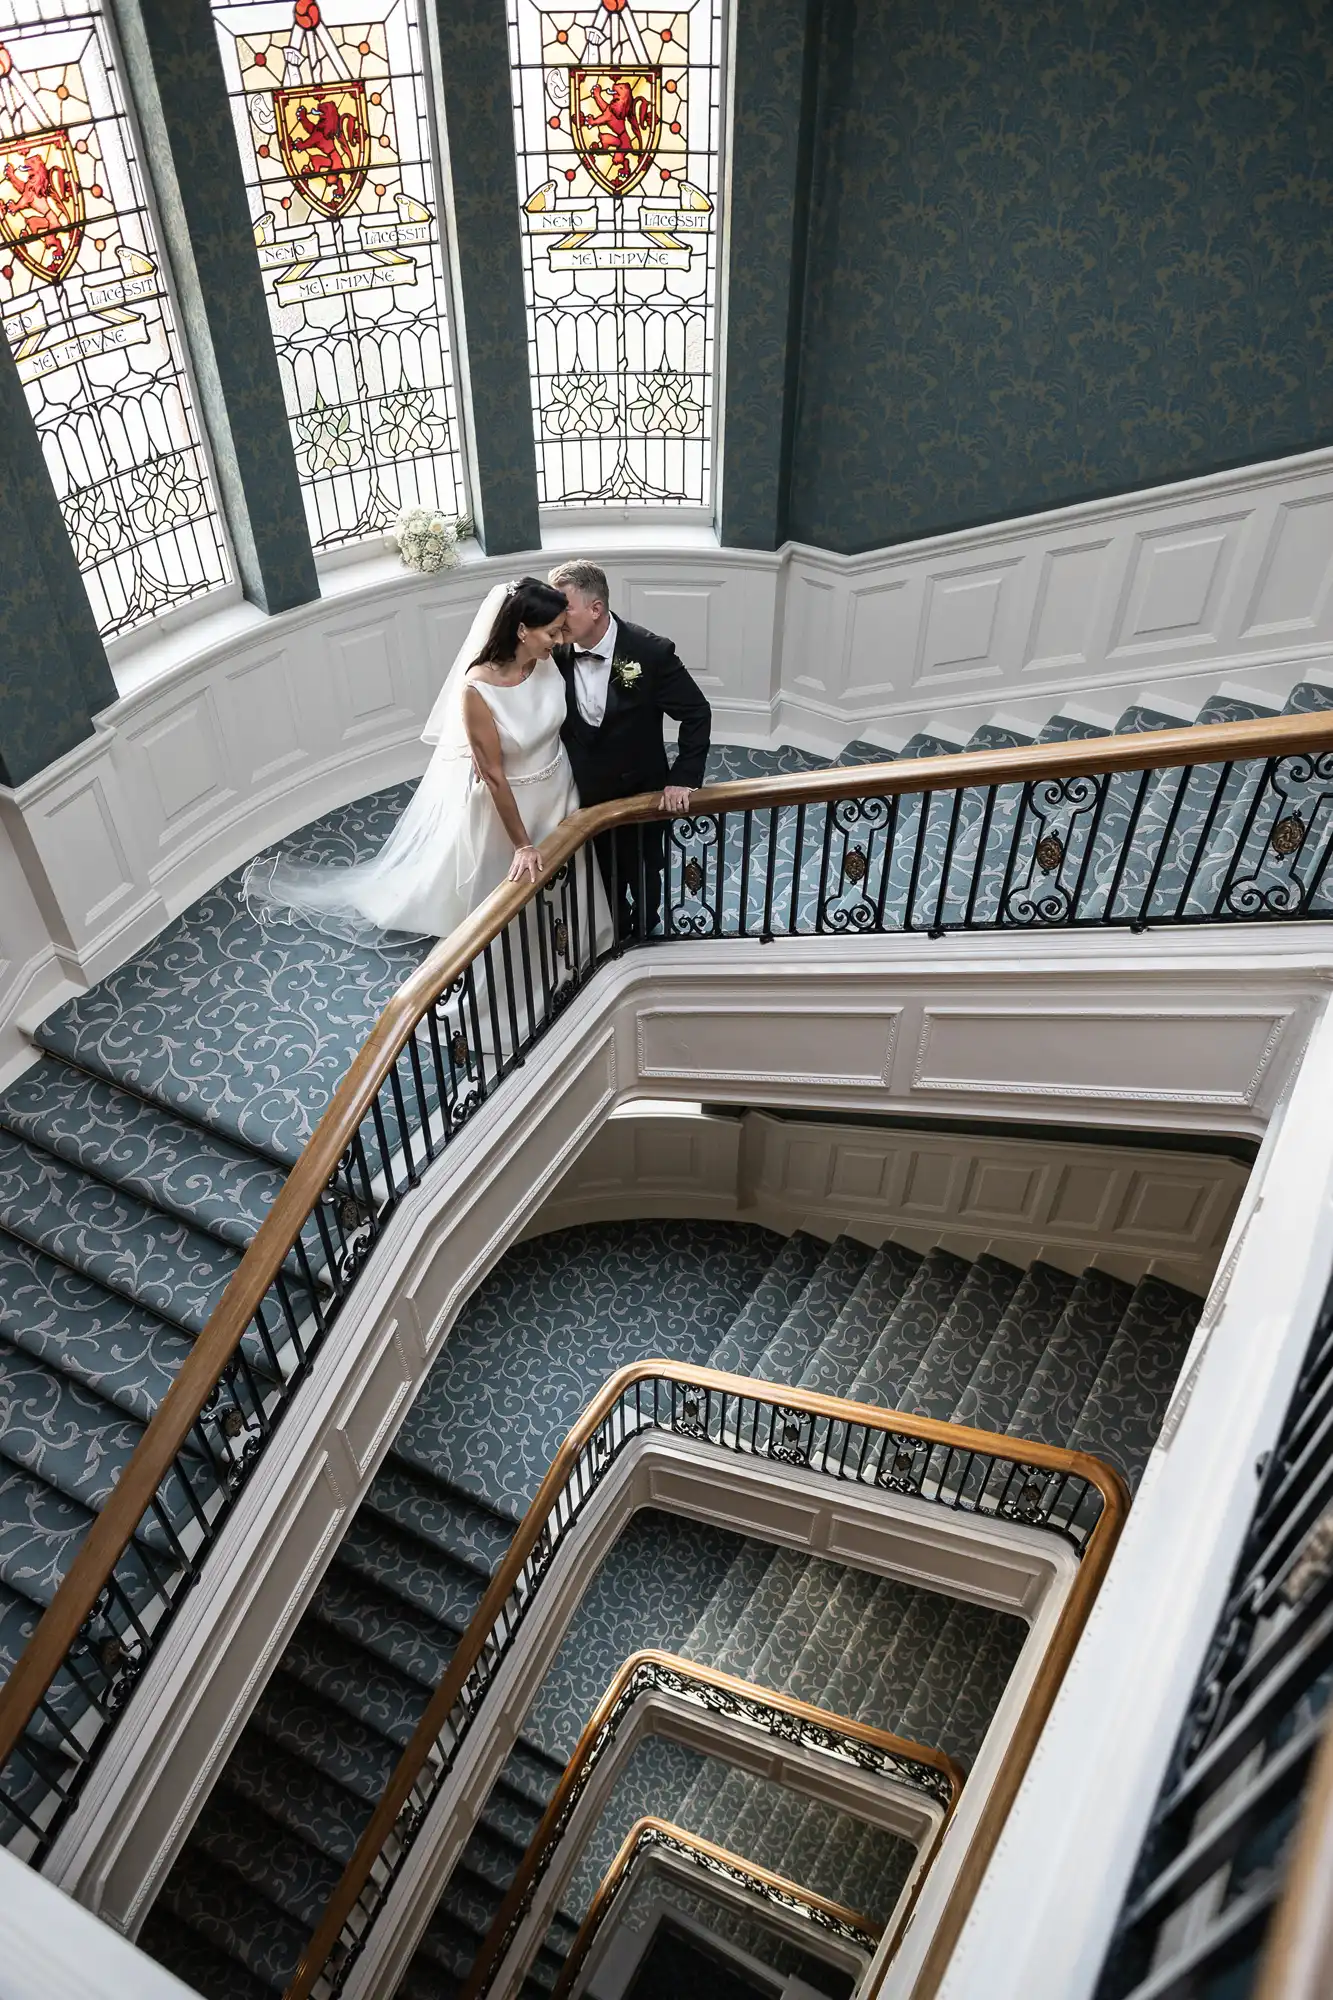 A bride and groom share an intimate moment on a spiraling staircase with ornate railings and stained glass windows in a grand building.